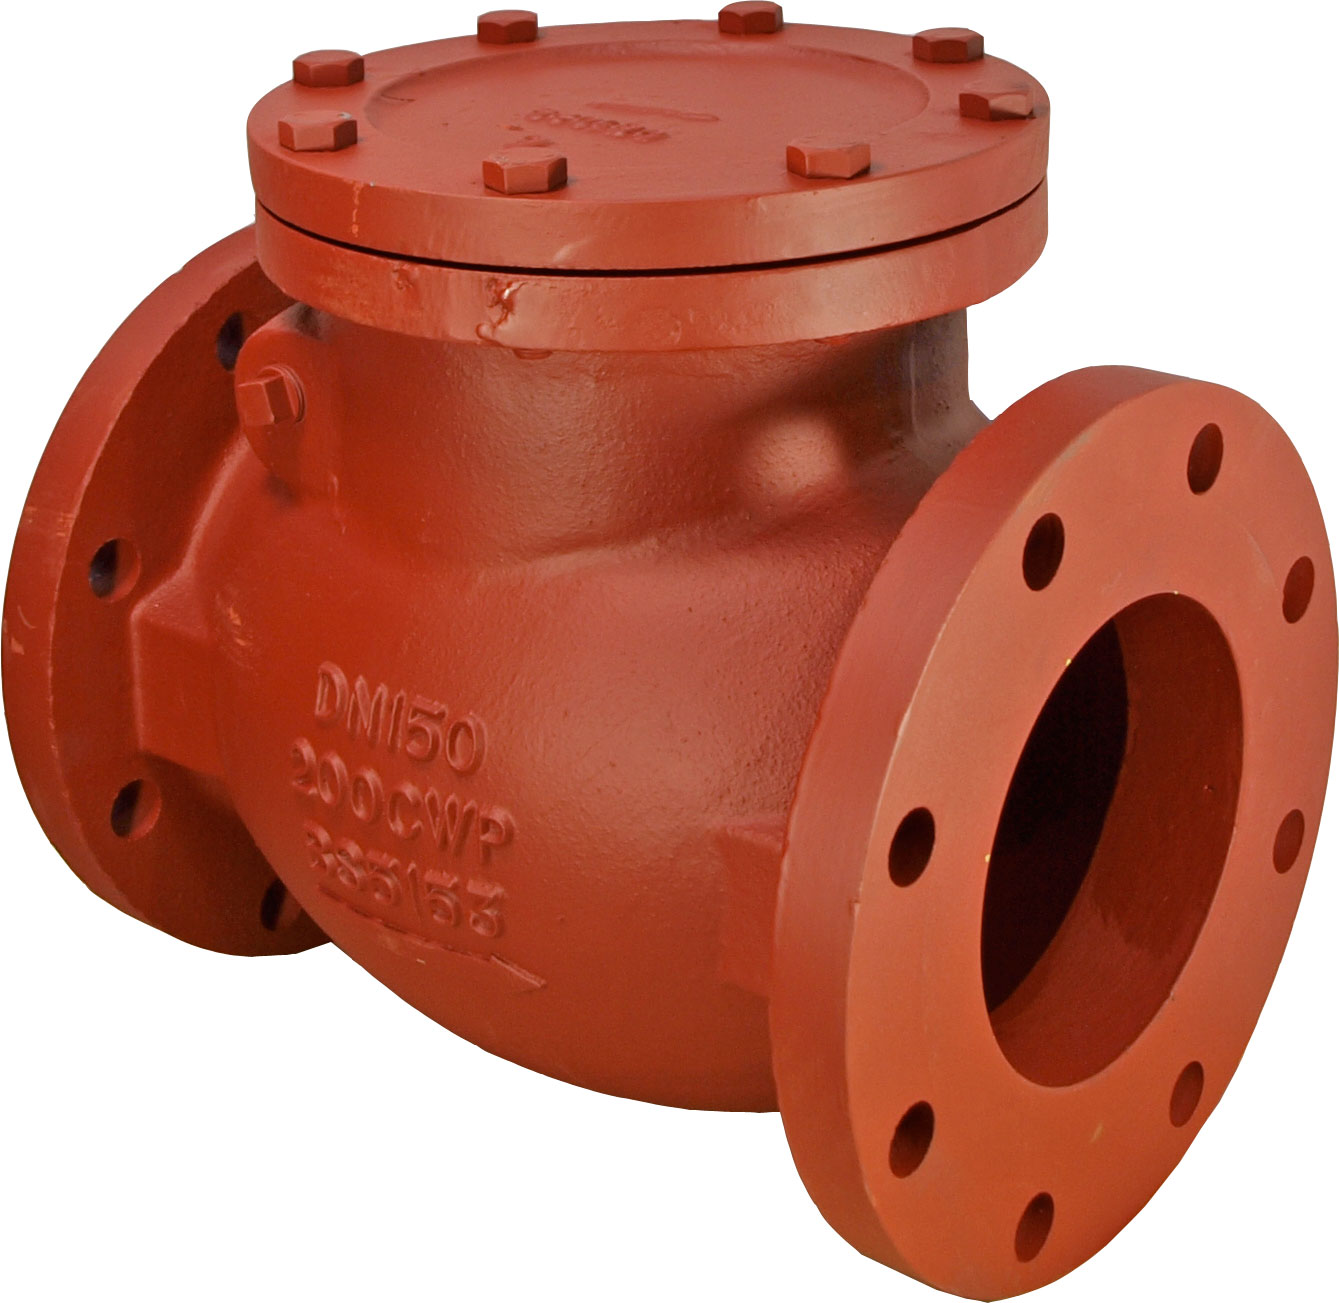 CAST IRON SWING CHECK VALVE FLANGED TABLE E